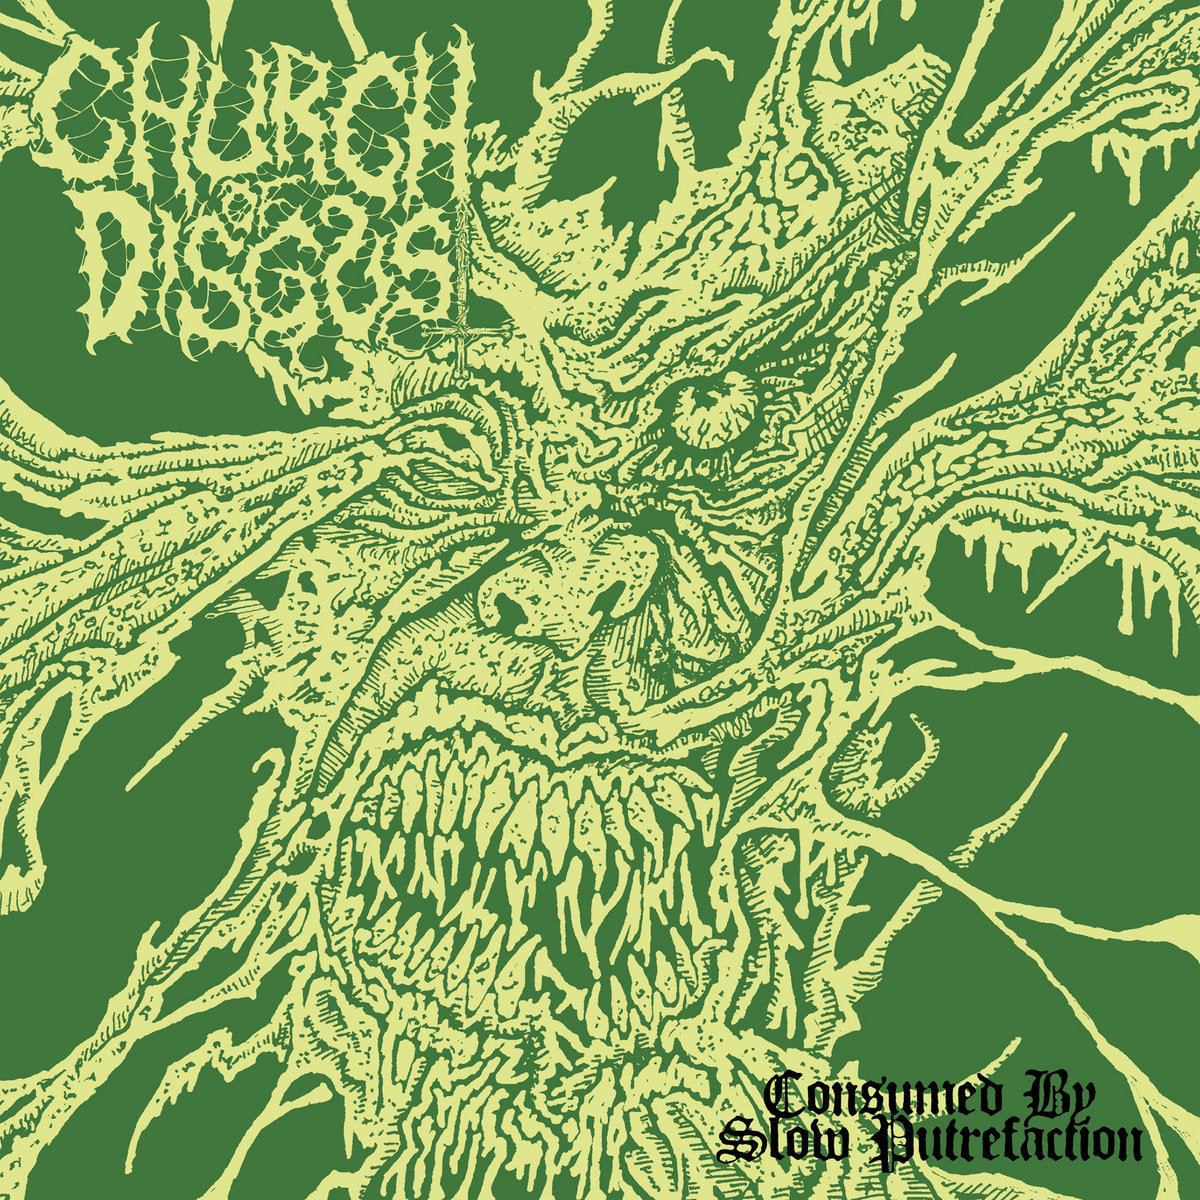 CHURCH OF DISGUST - CONSUMED BY SLOW PUTREFACTION Cassette Tape